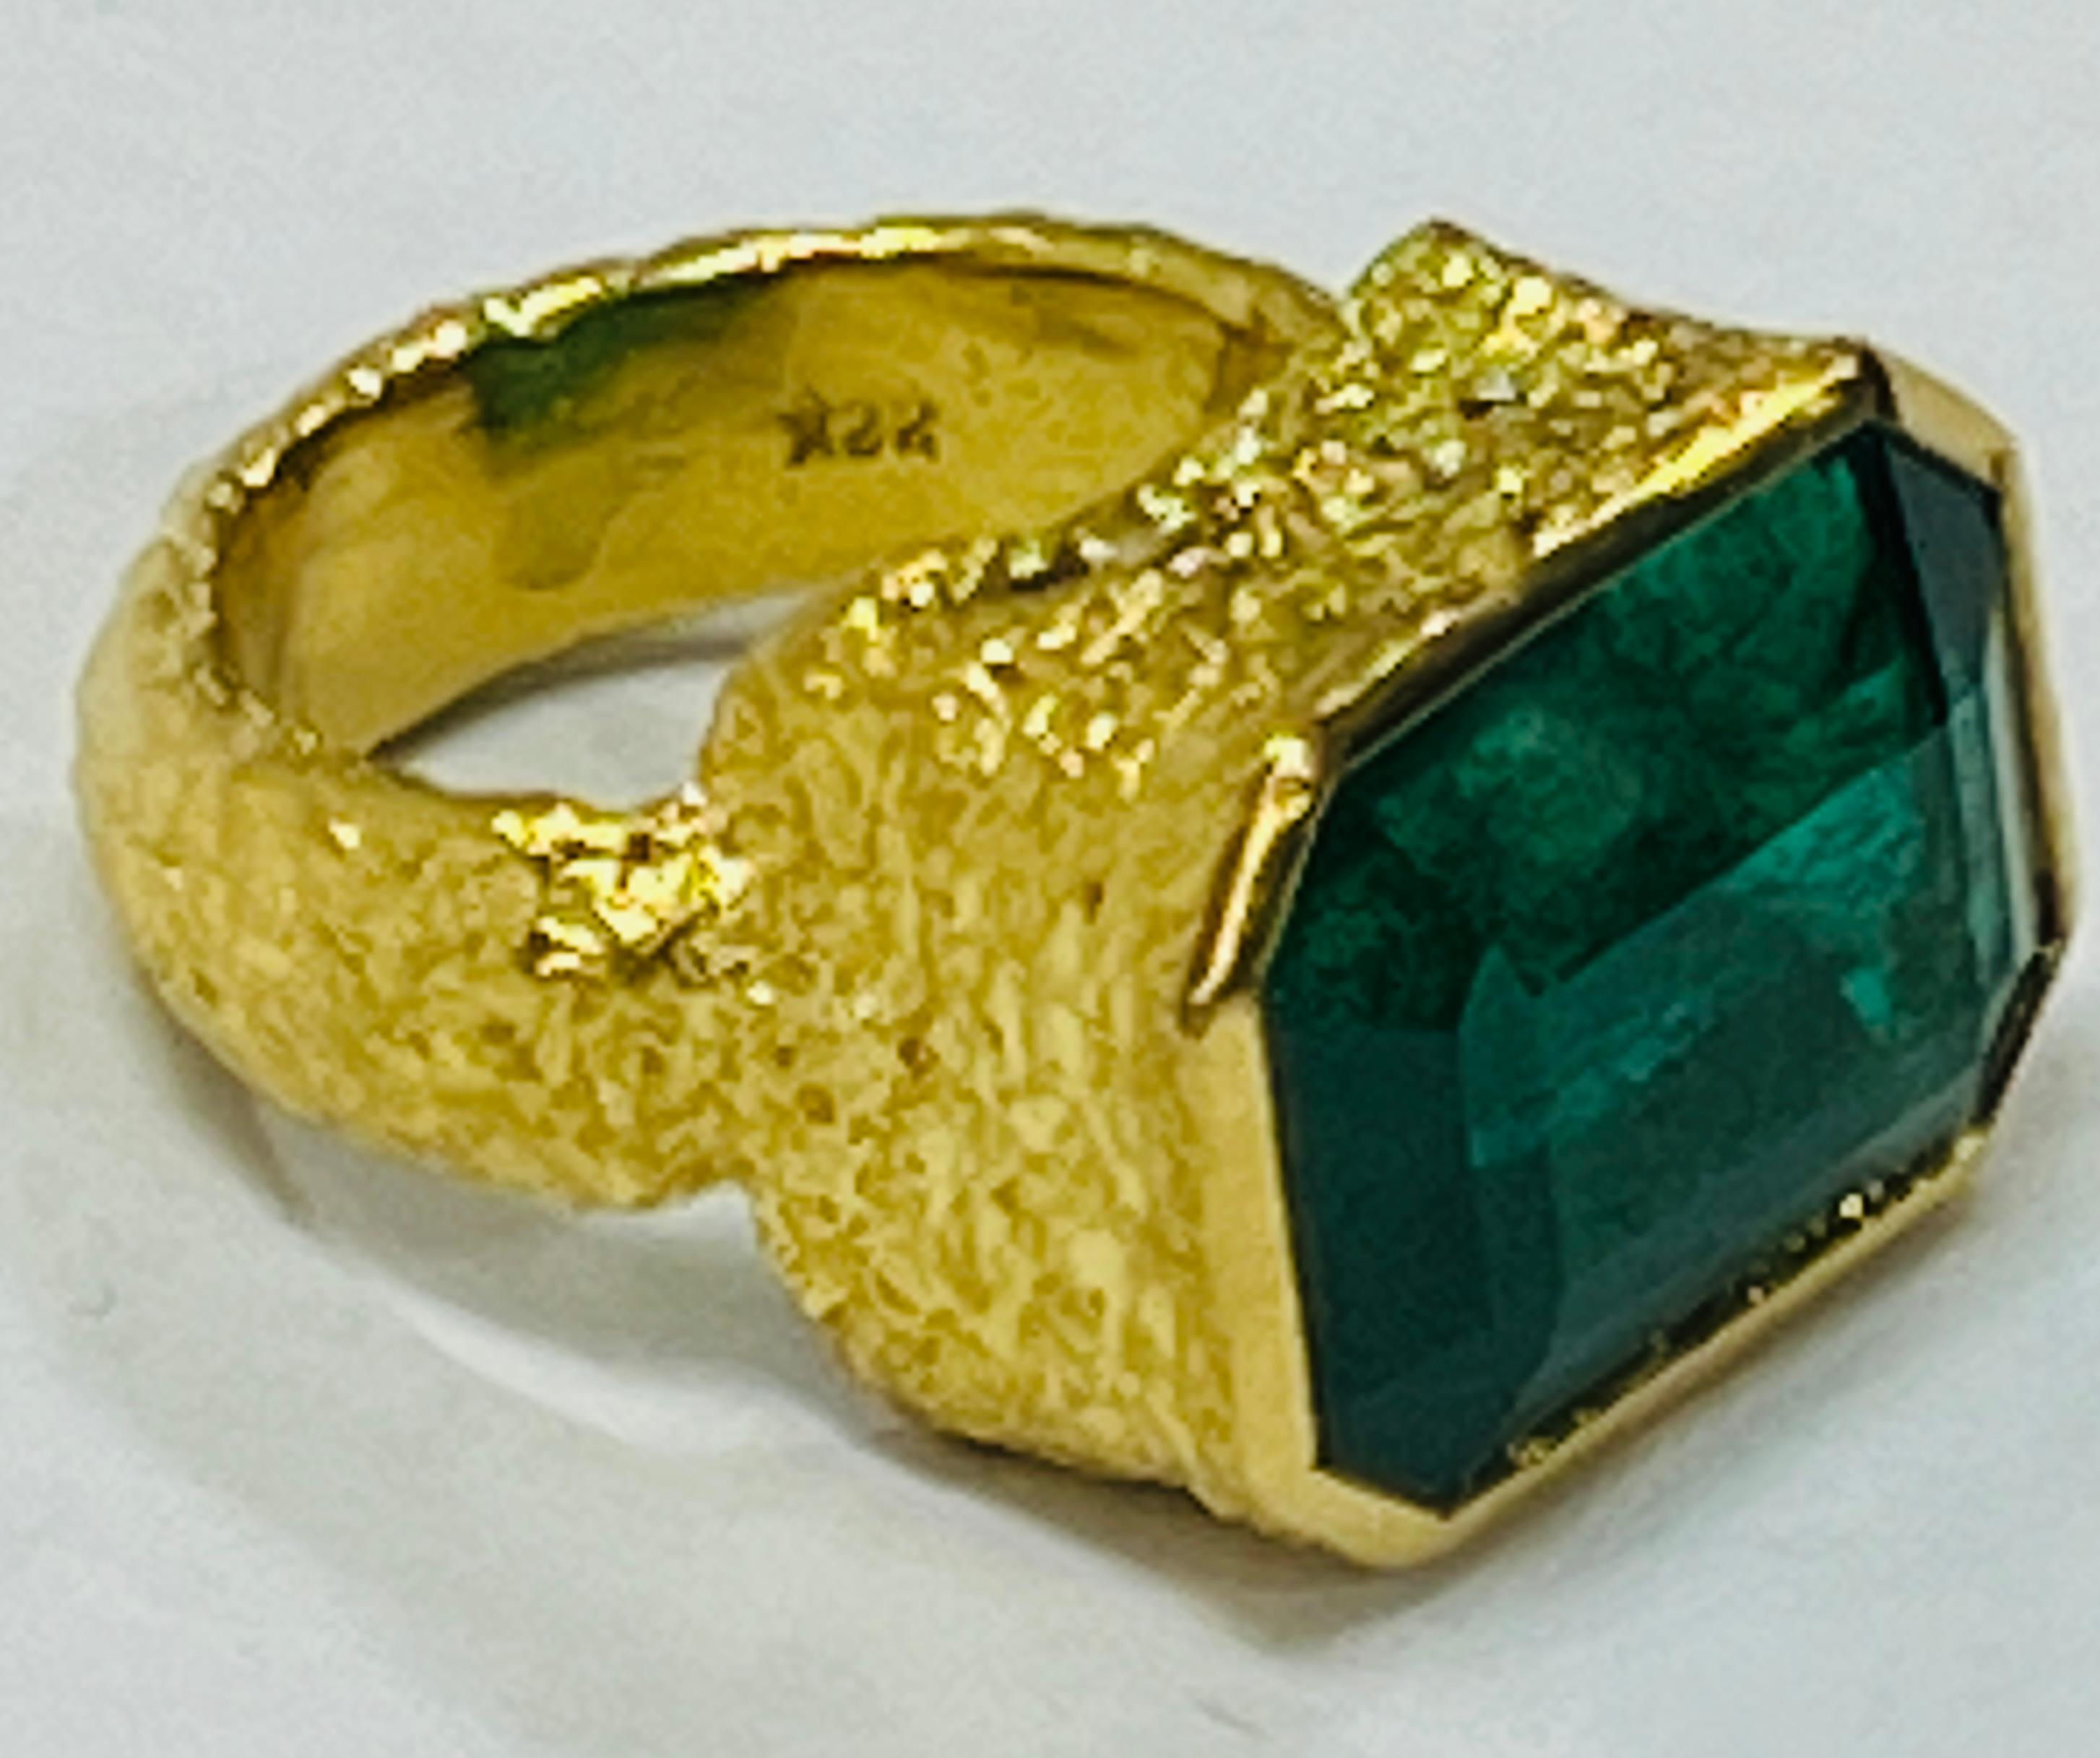 16k Emerald Cocktail Ring, by Tagili 1